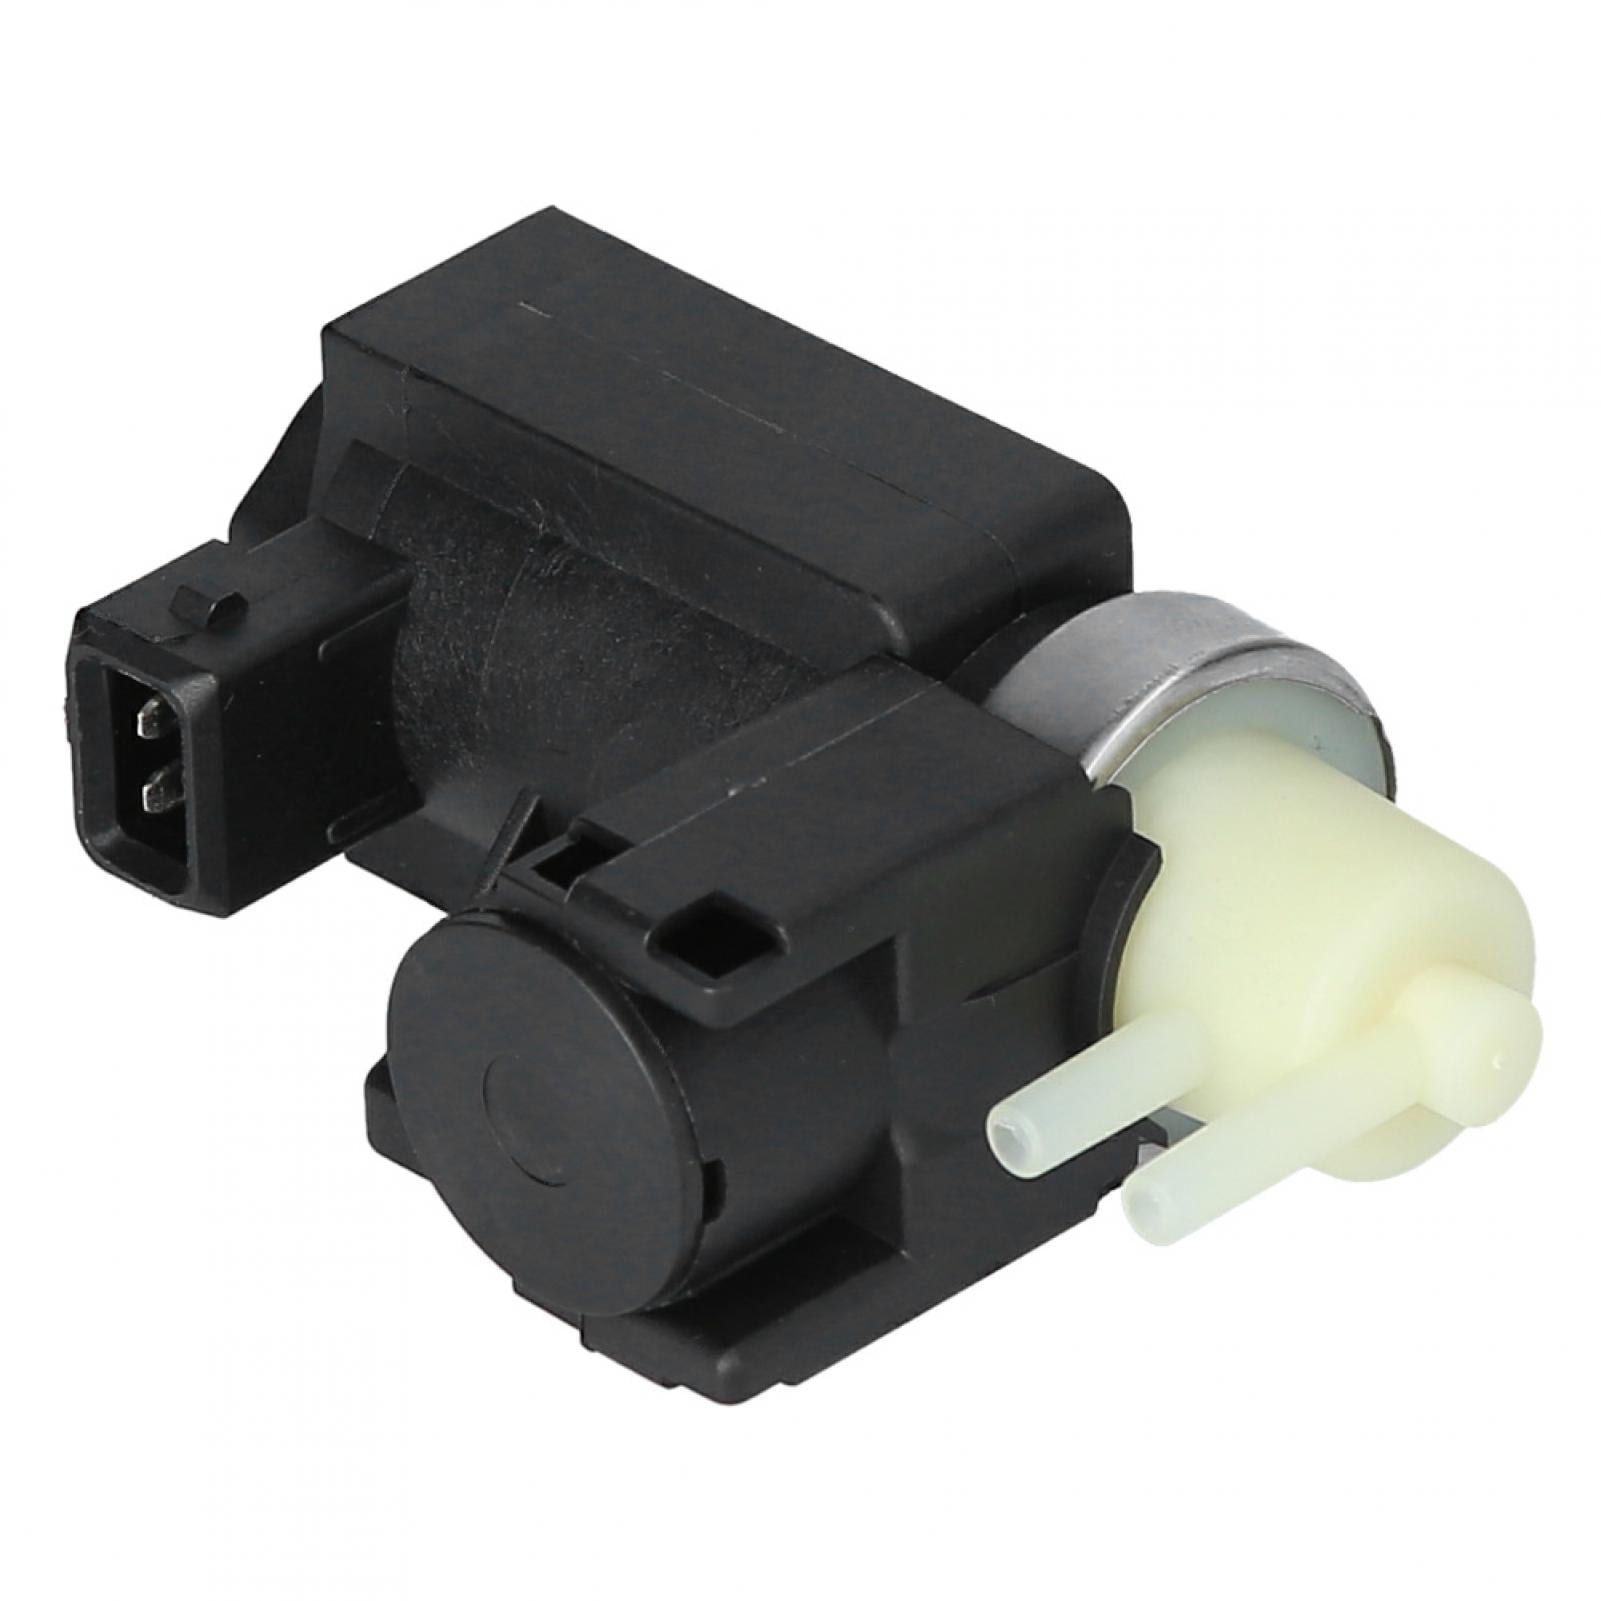 Turbo Boost Solenoid Valve 11747626350 Replacement Fit for E90 335i E60 535i 550i 1PC 